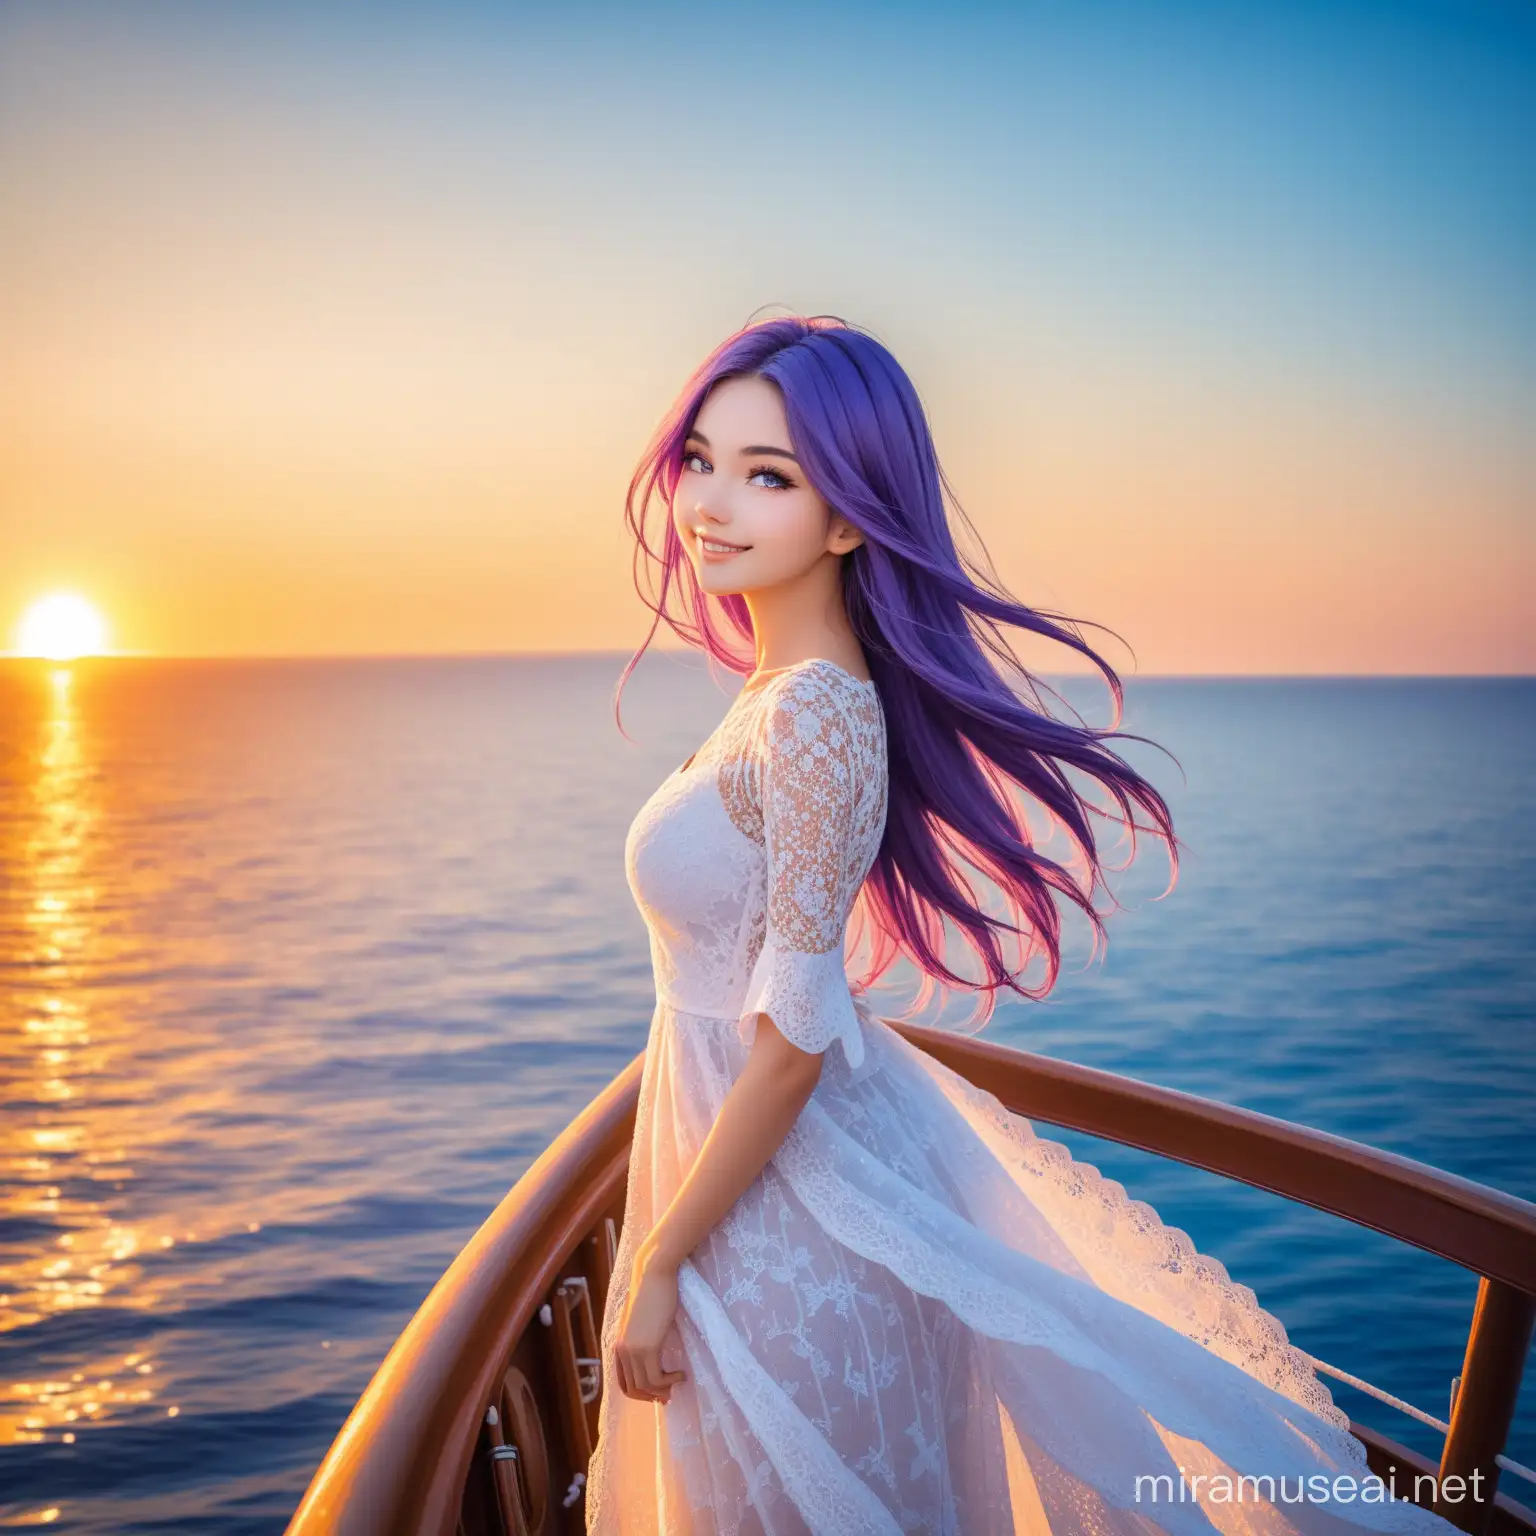 Graceful Woman with Violet Tresses on Ship Bow at Sunrise